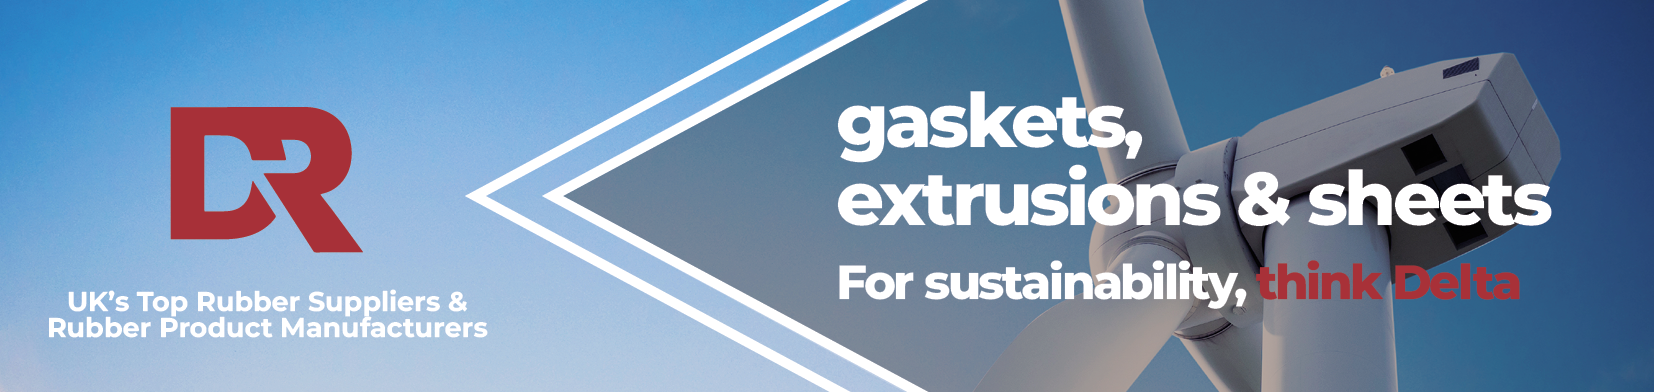 Rubber gaskets specialist seals for usage in the energy industry